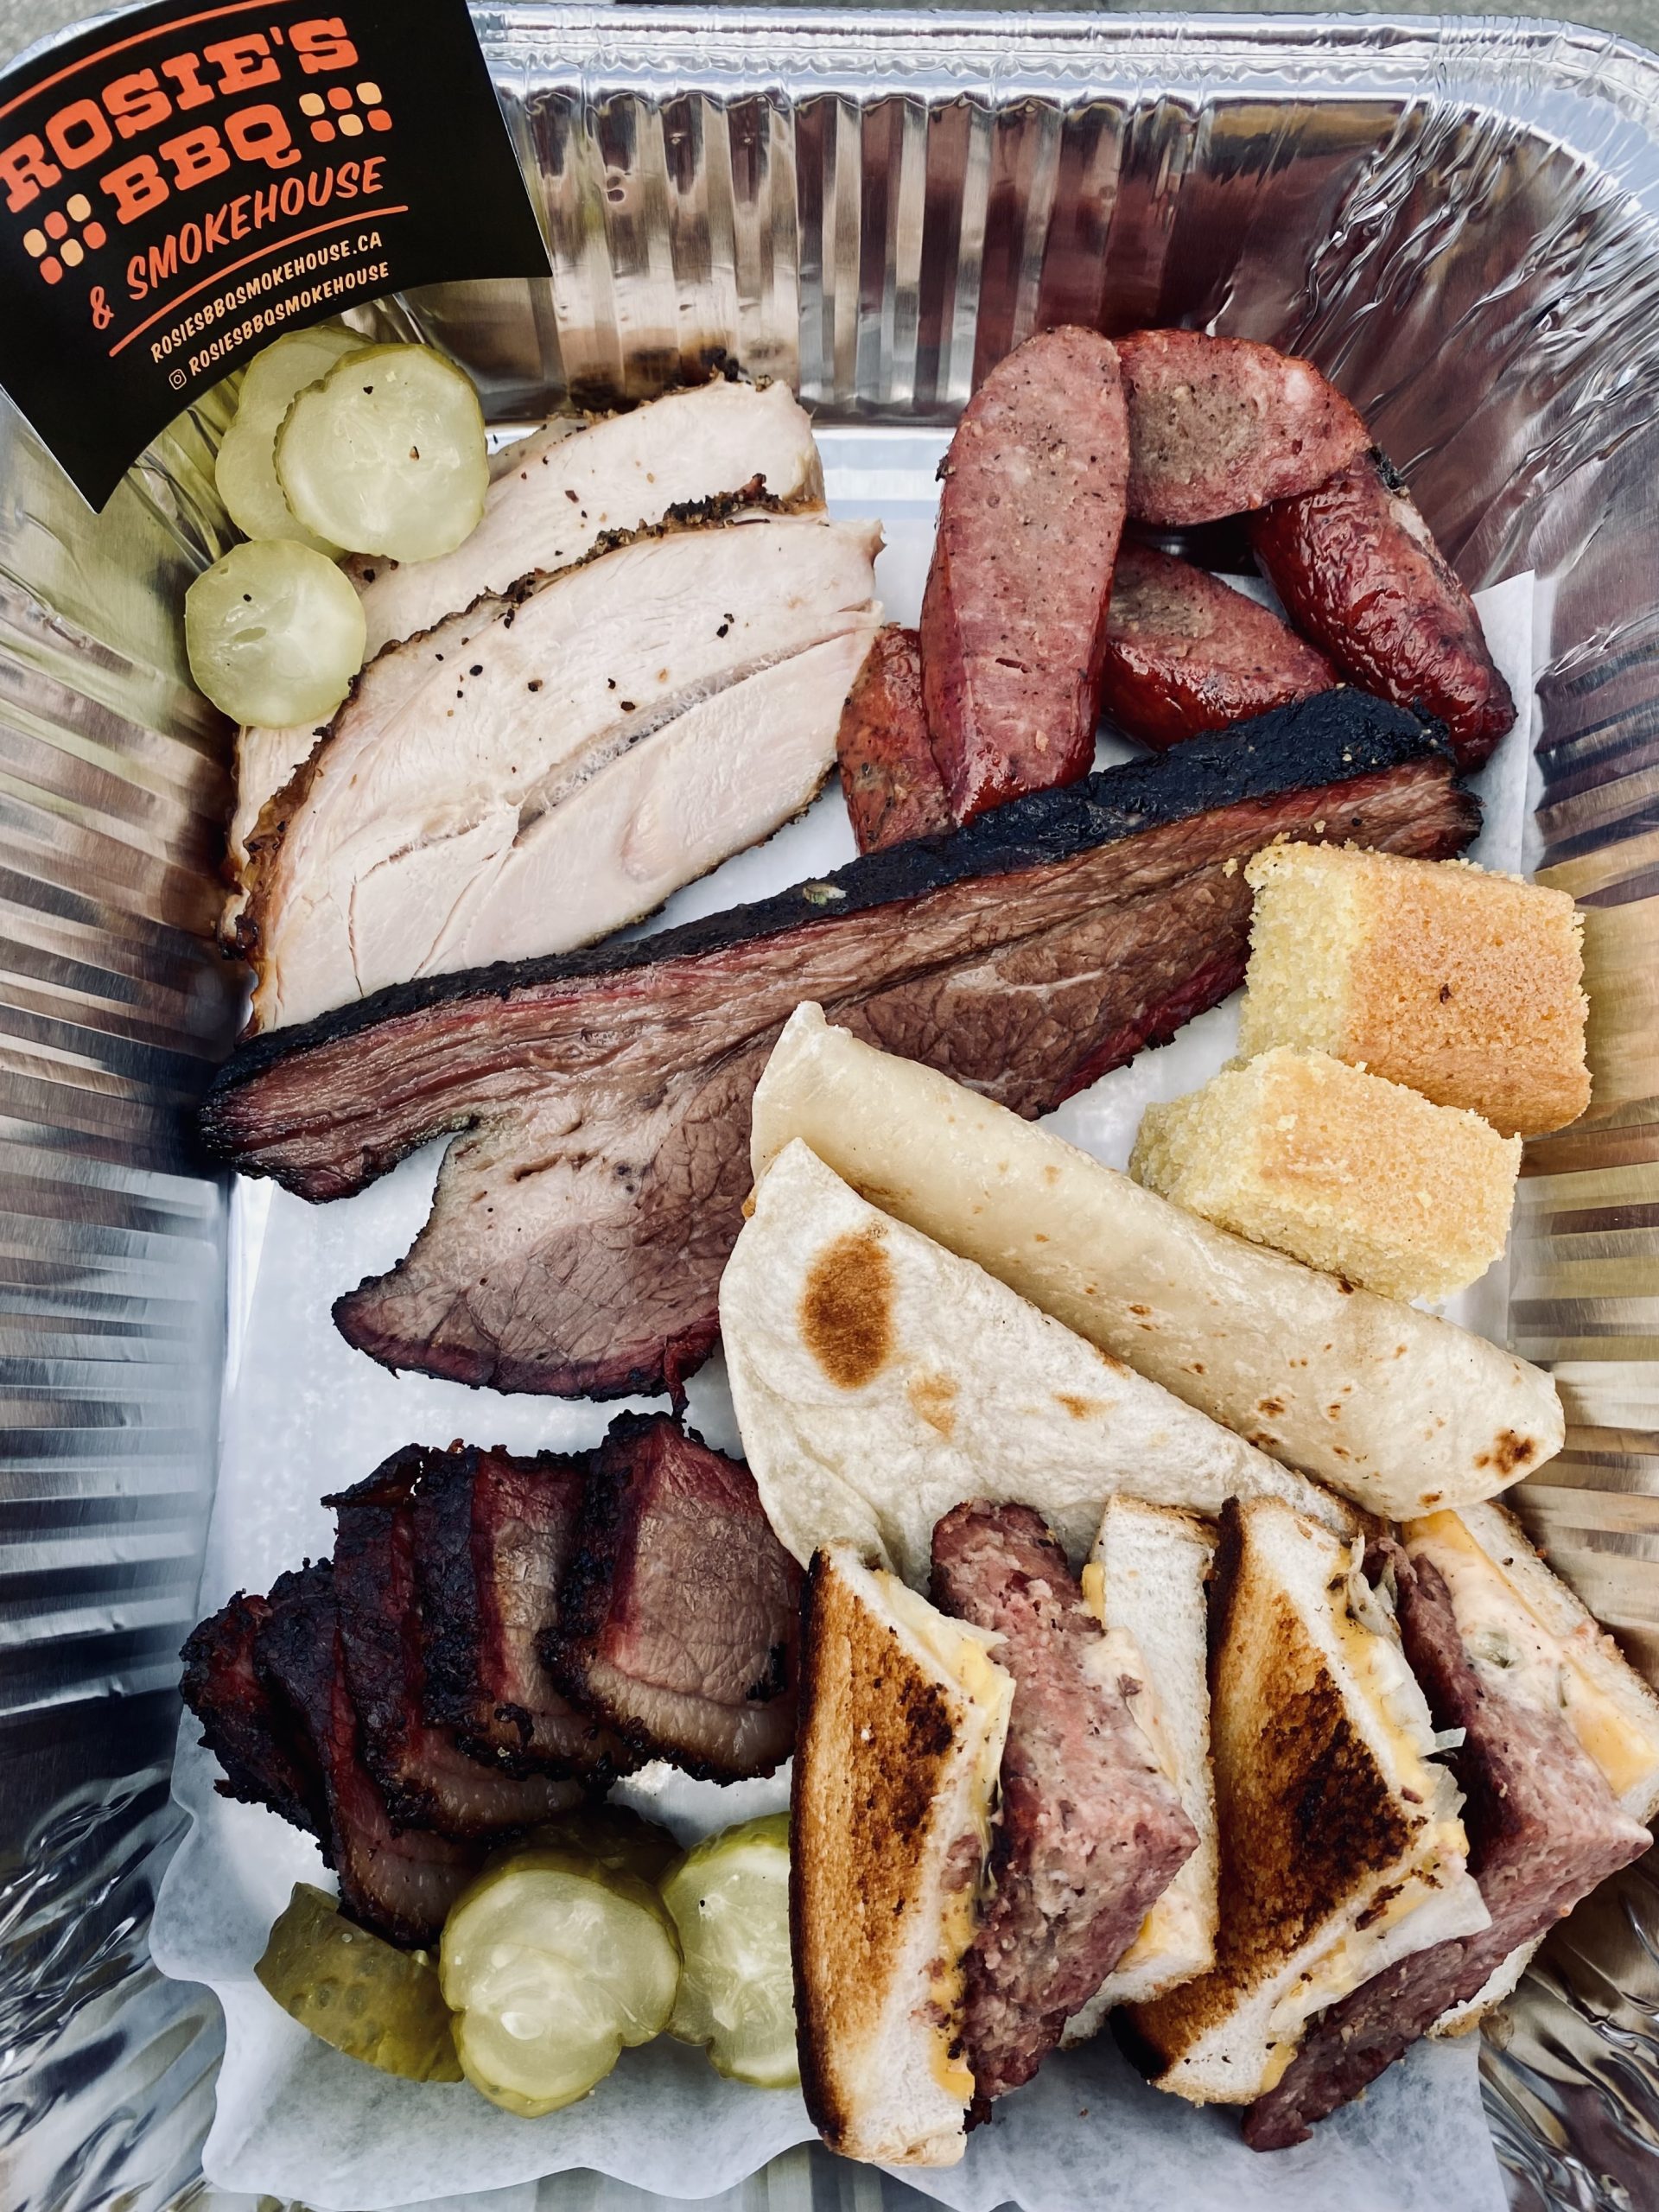 rosie's bbq and smokehouse season preview may 2022 preview